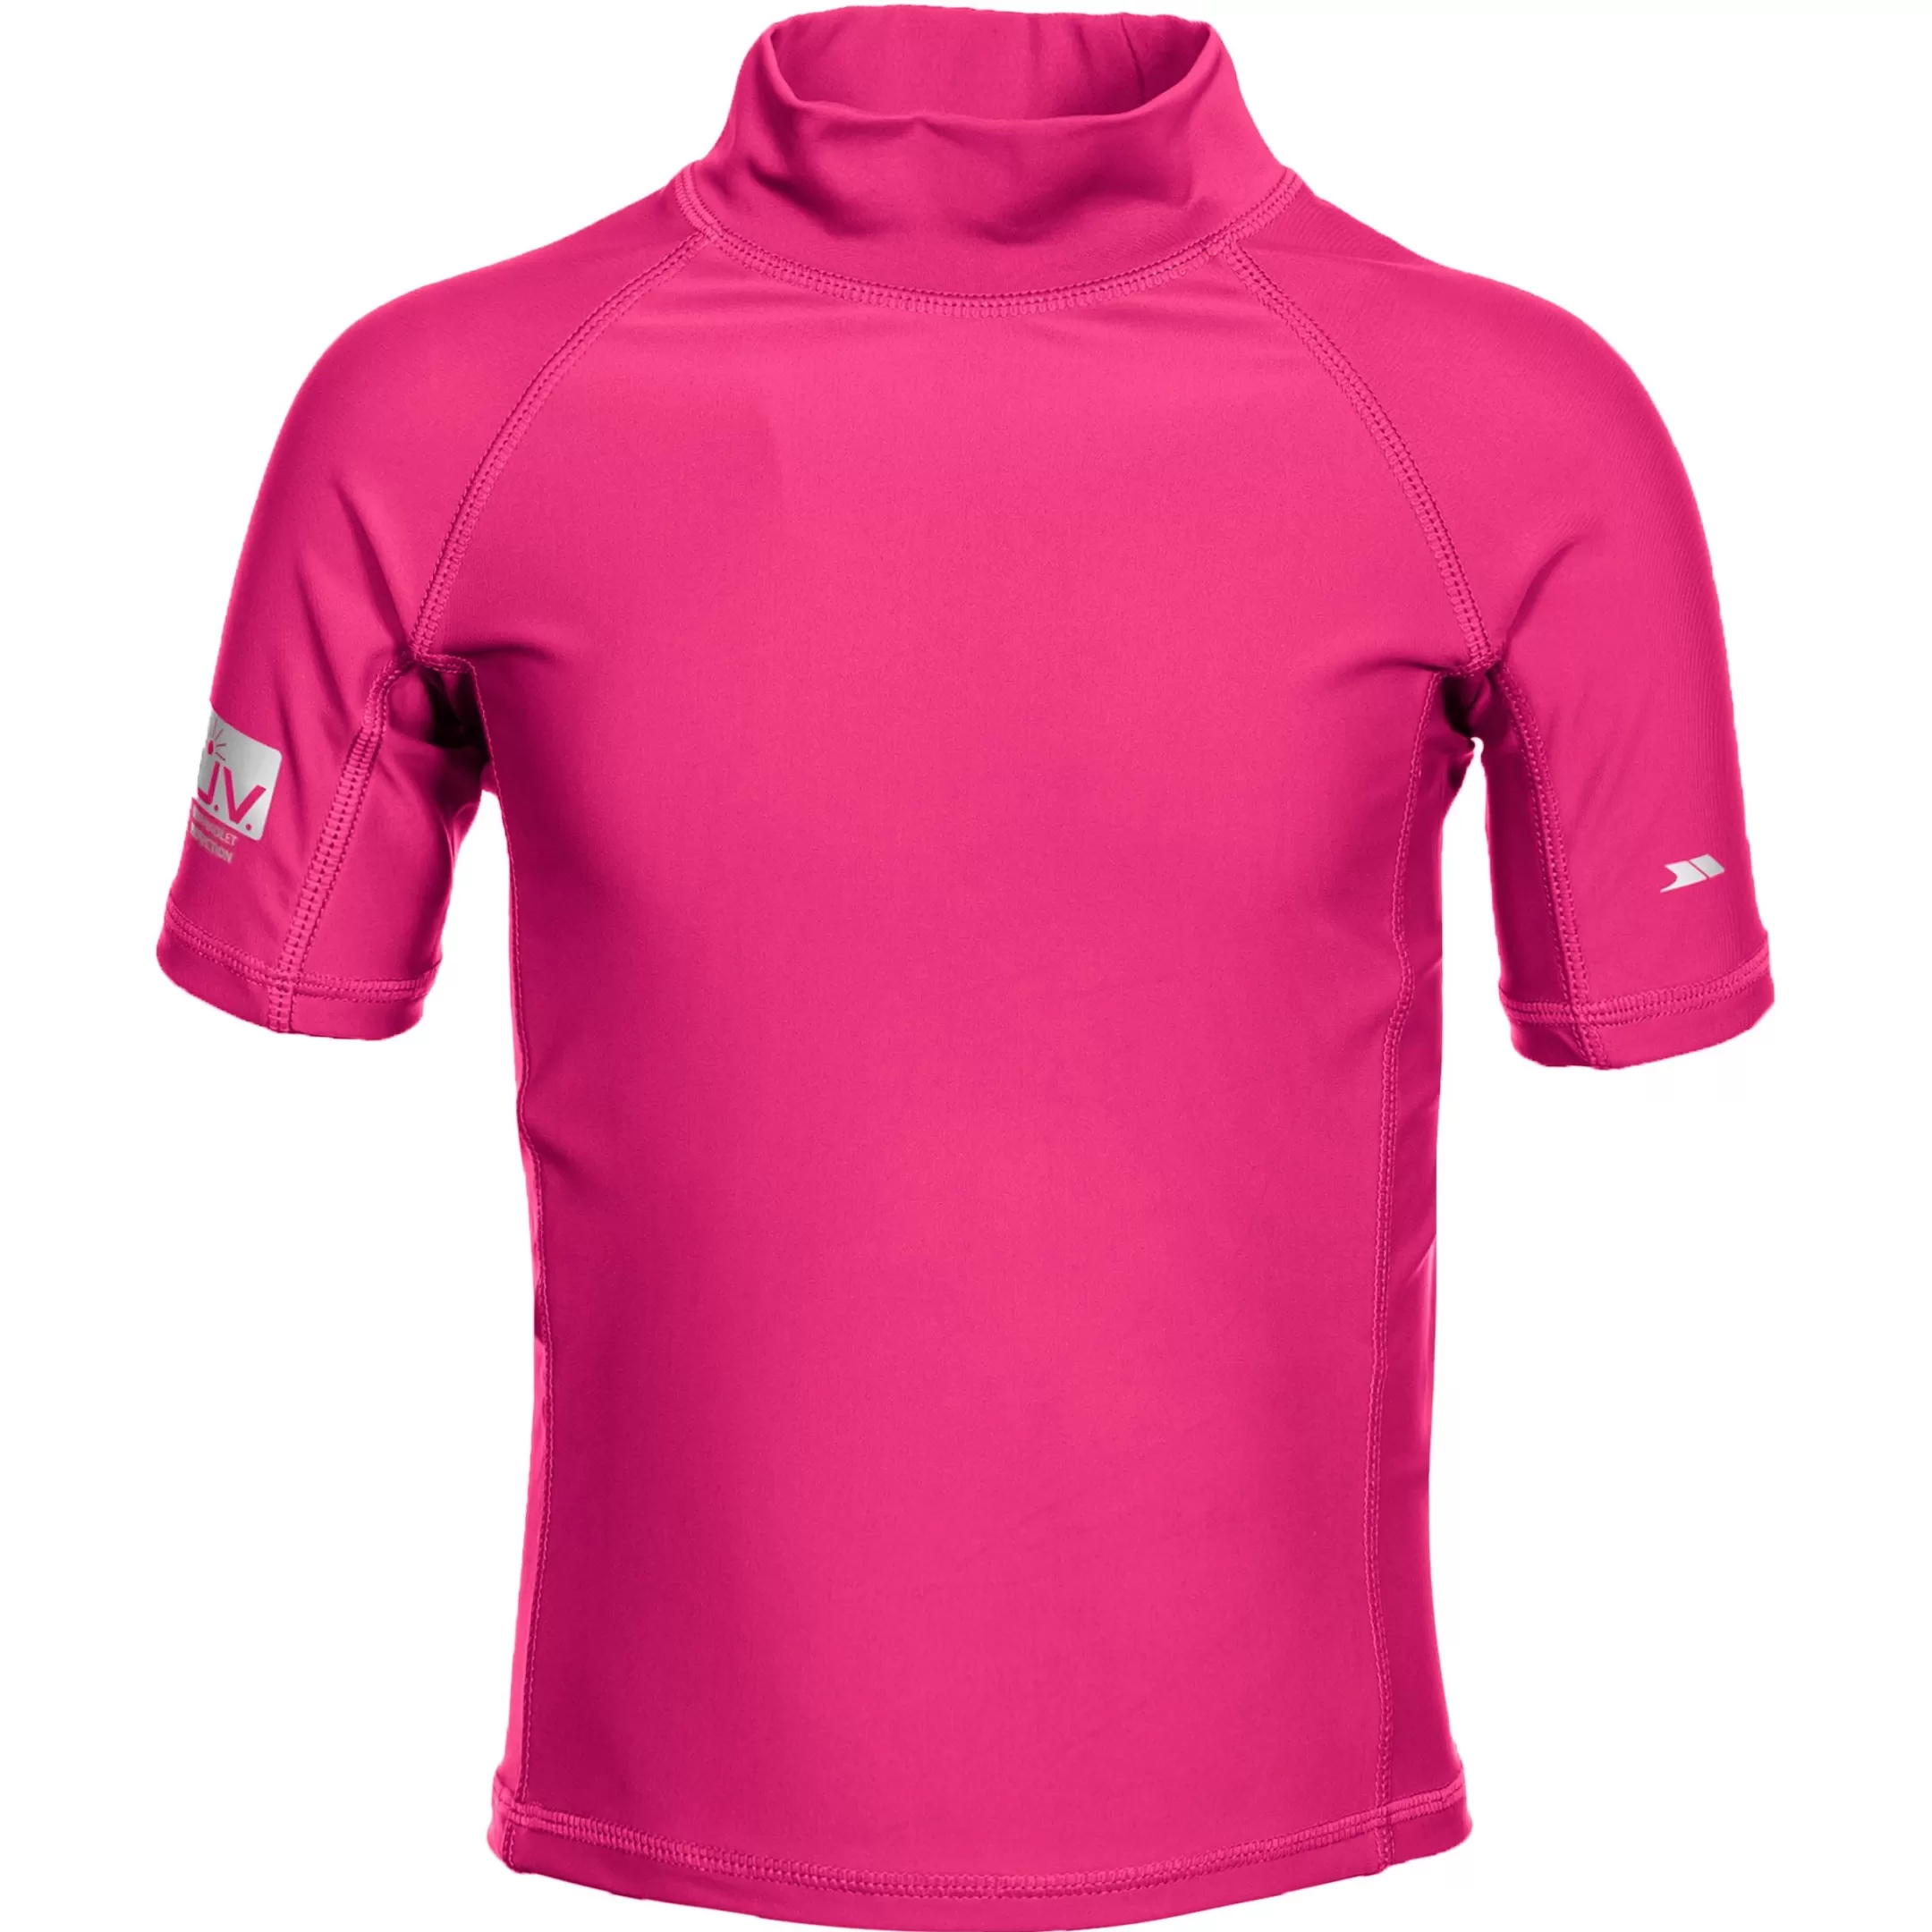 Kids' Rash Guard Swim Top with UV Protection Crew | Trespass Outlet